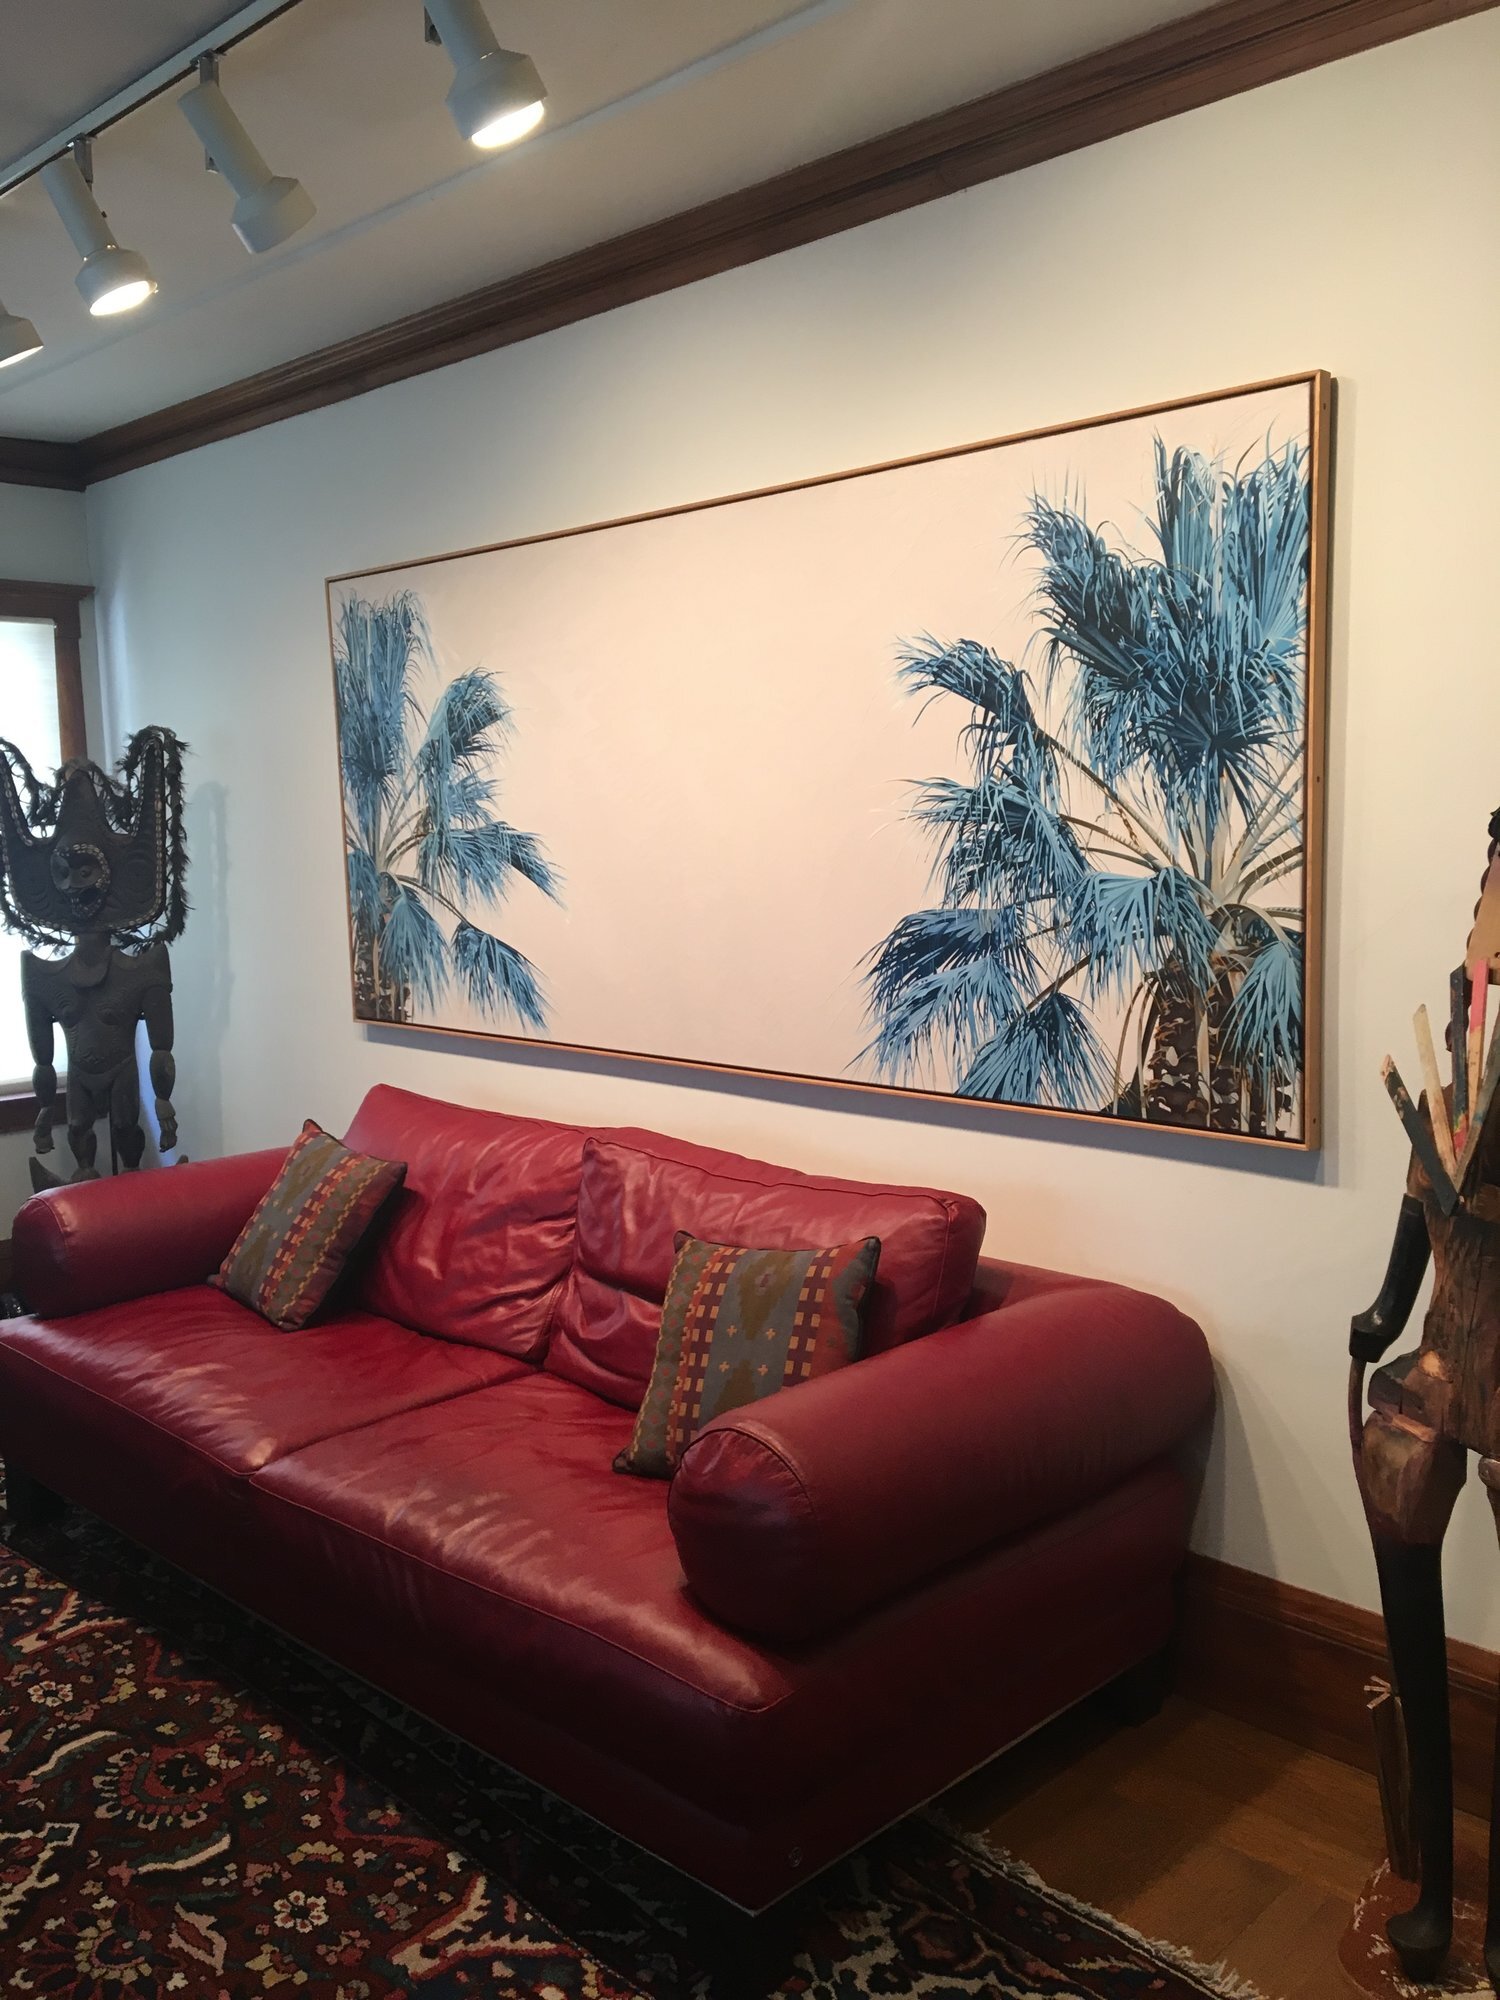 Mel's painting, "Four Seasons: Winter" (1983), in his living room.